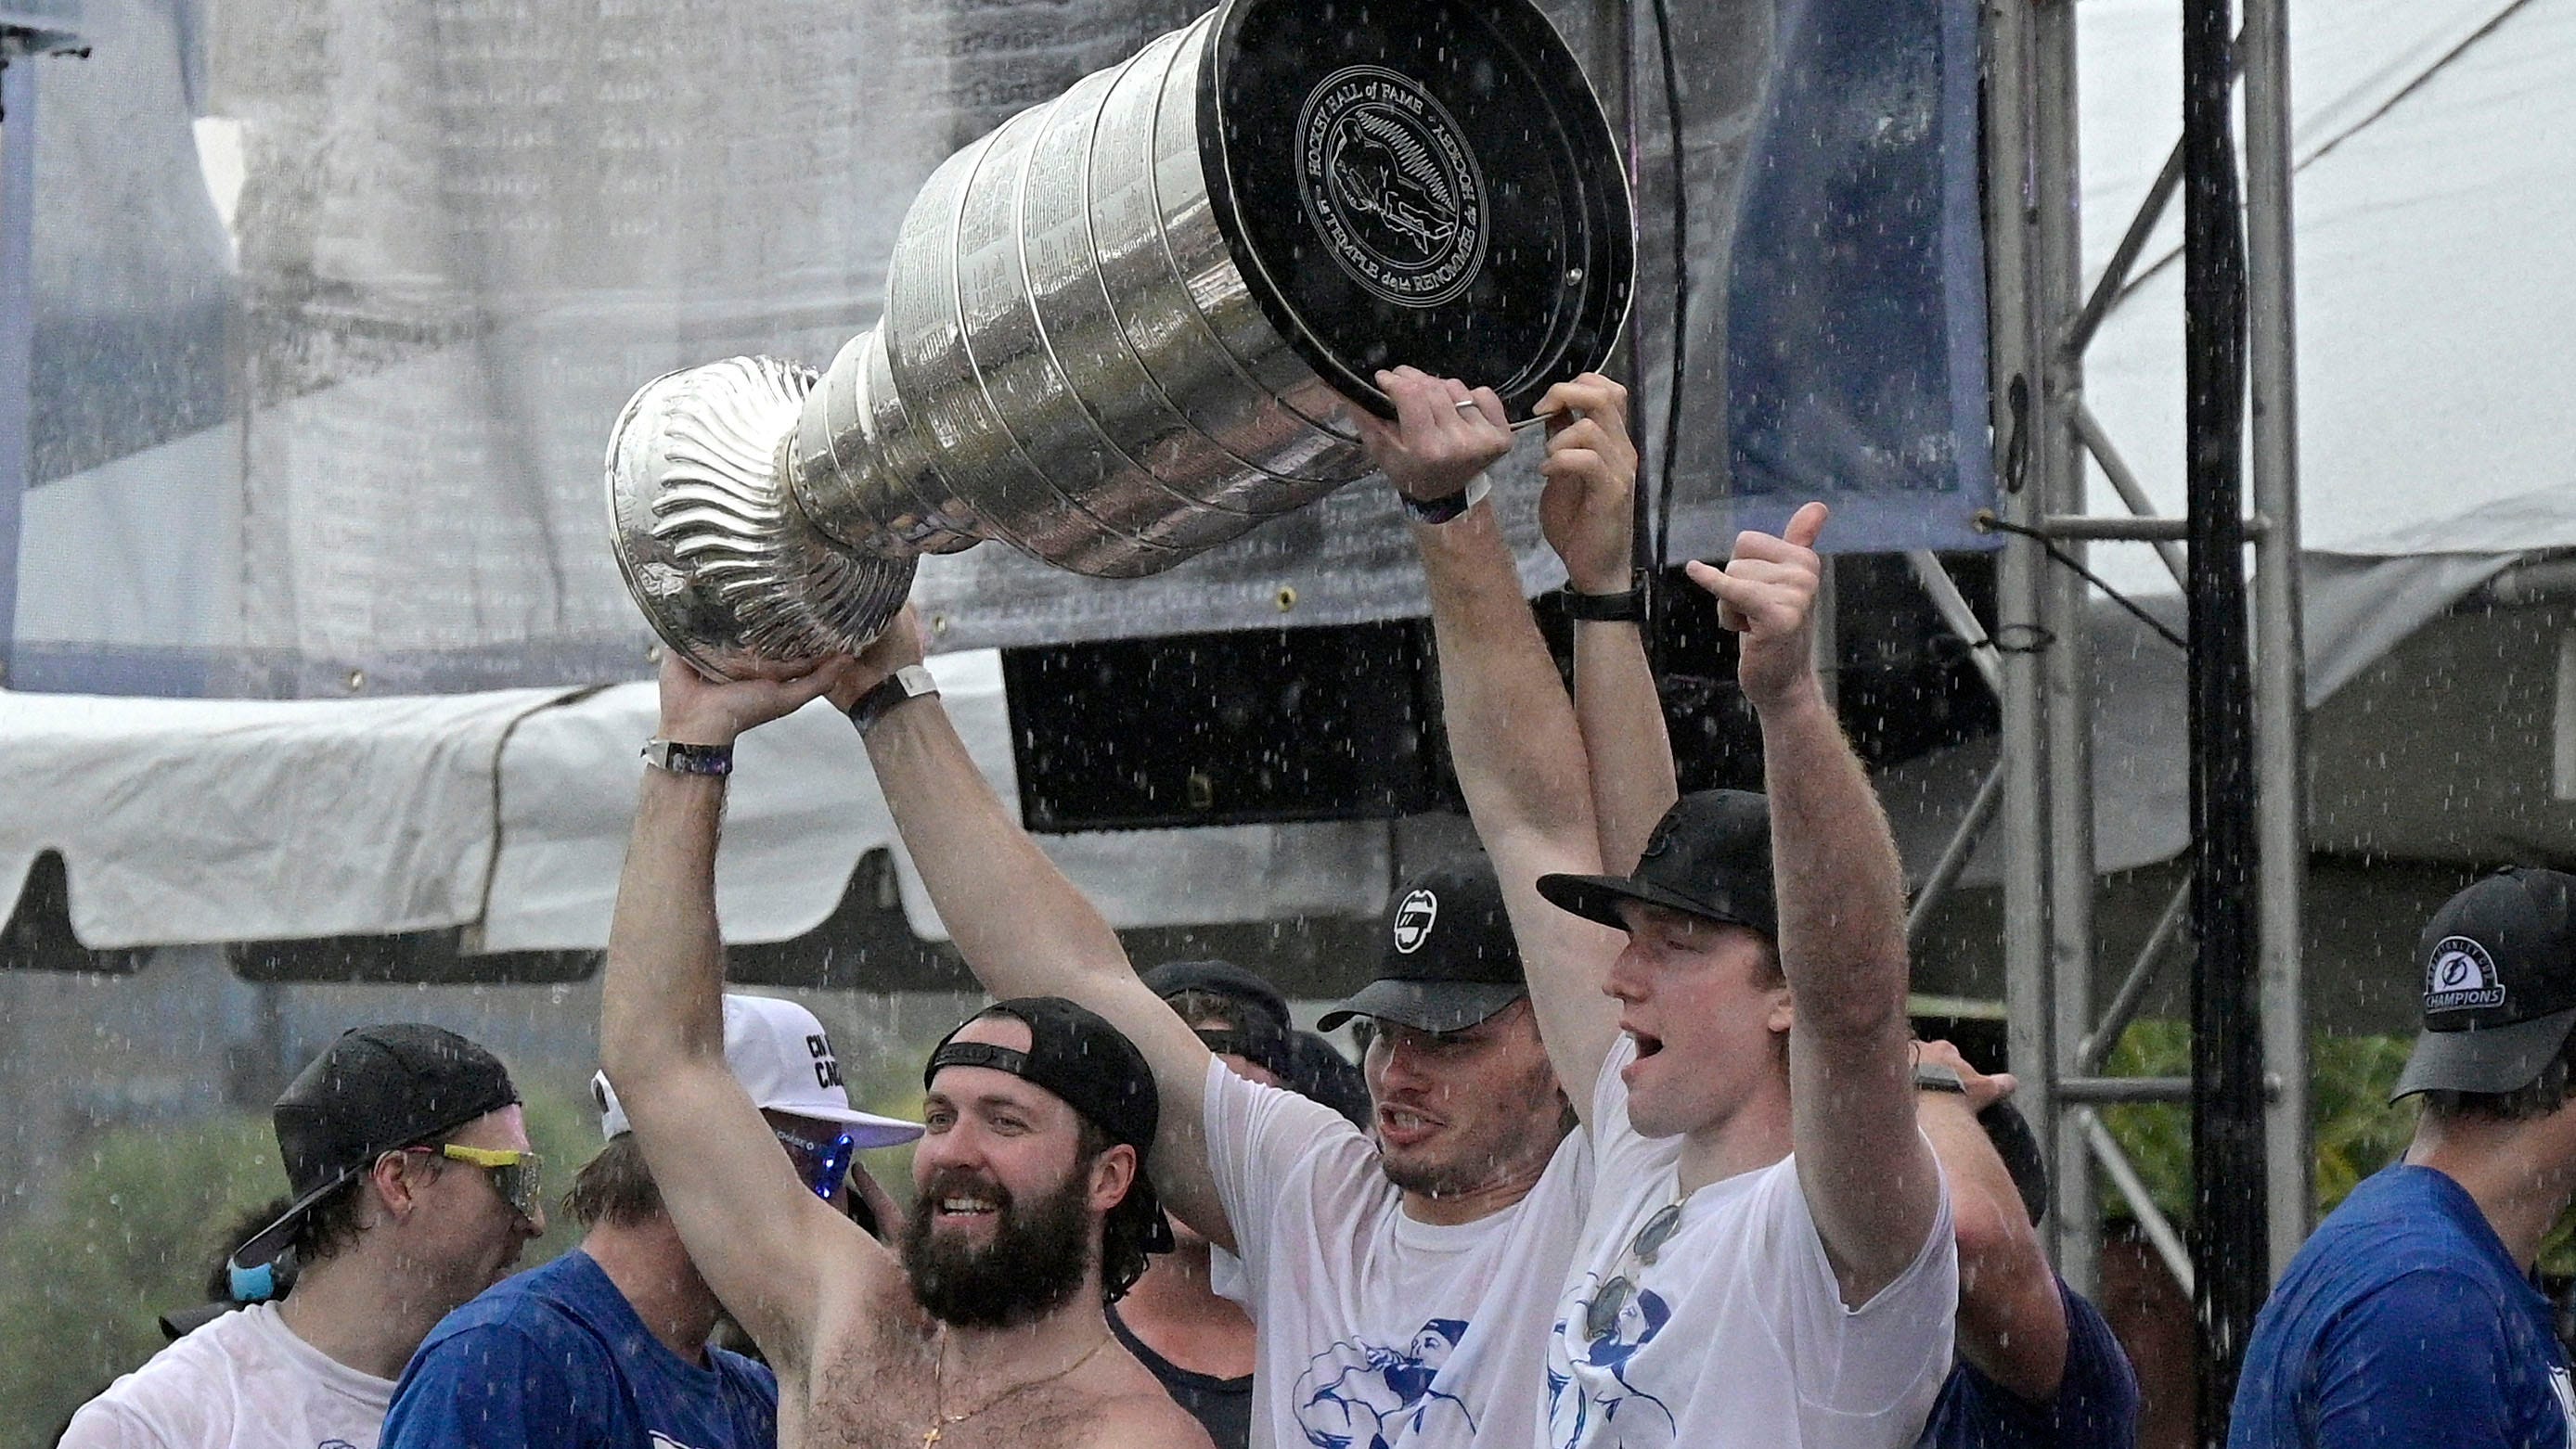 Tampa Bay Lightning could hoist Stanley Cup with win Monday